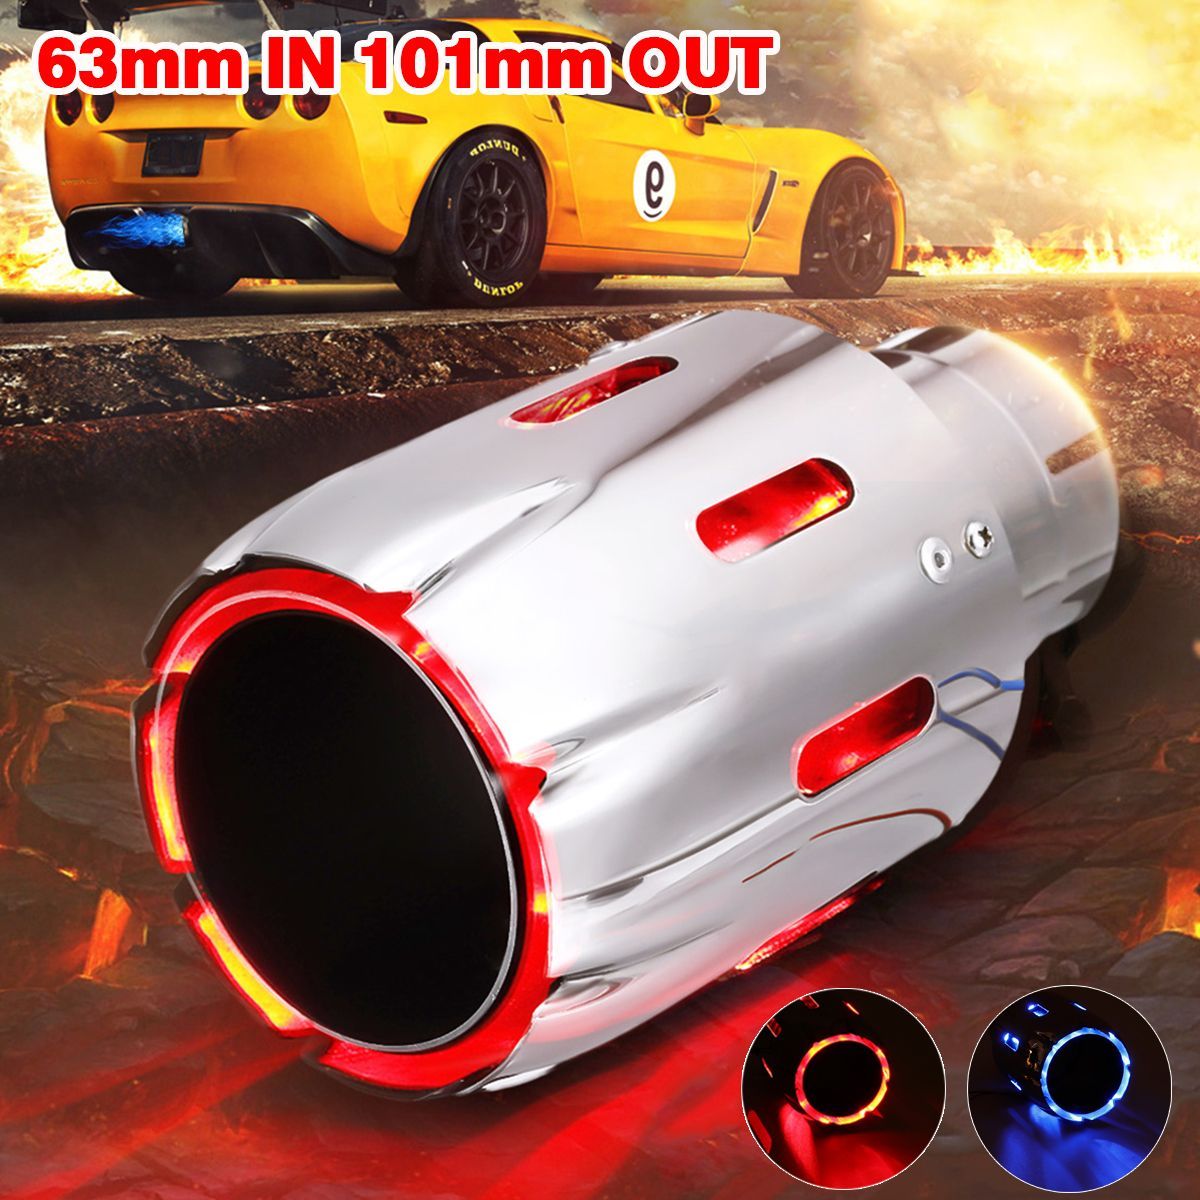 63mm-IN-101mm-Out-Stainless-Steel-Exhaust-Muffler-Blue-Red-LED-Light-1683561